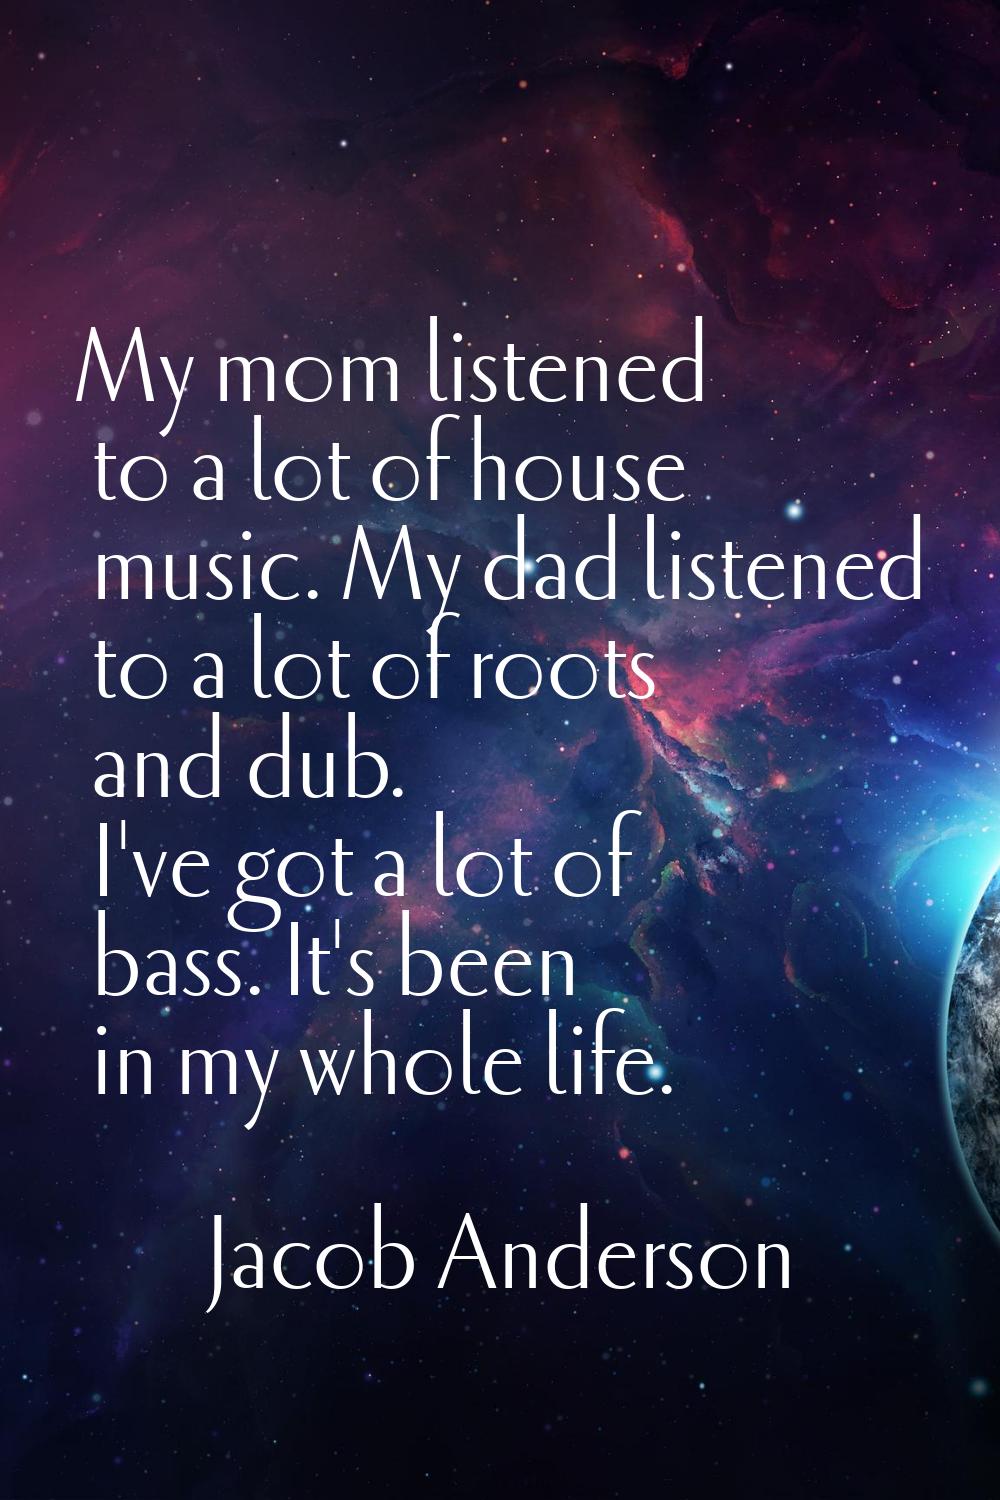 My mom listened to a lot of house music. My dad listened to a lot of roots and dub. I've got a lot 